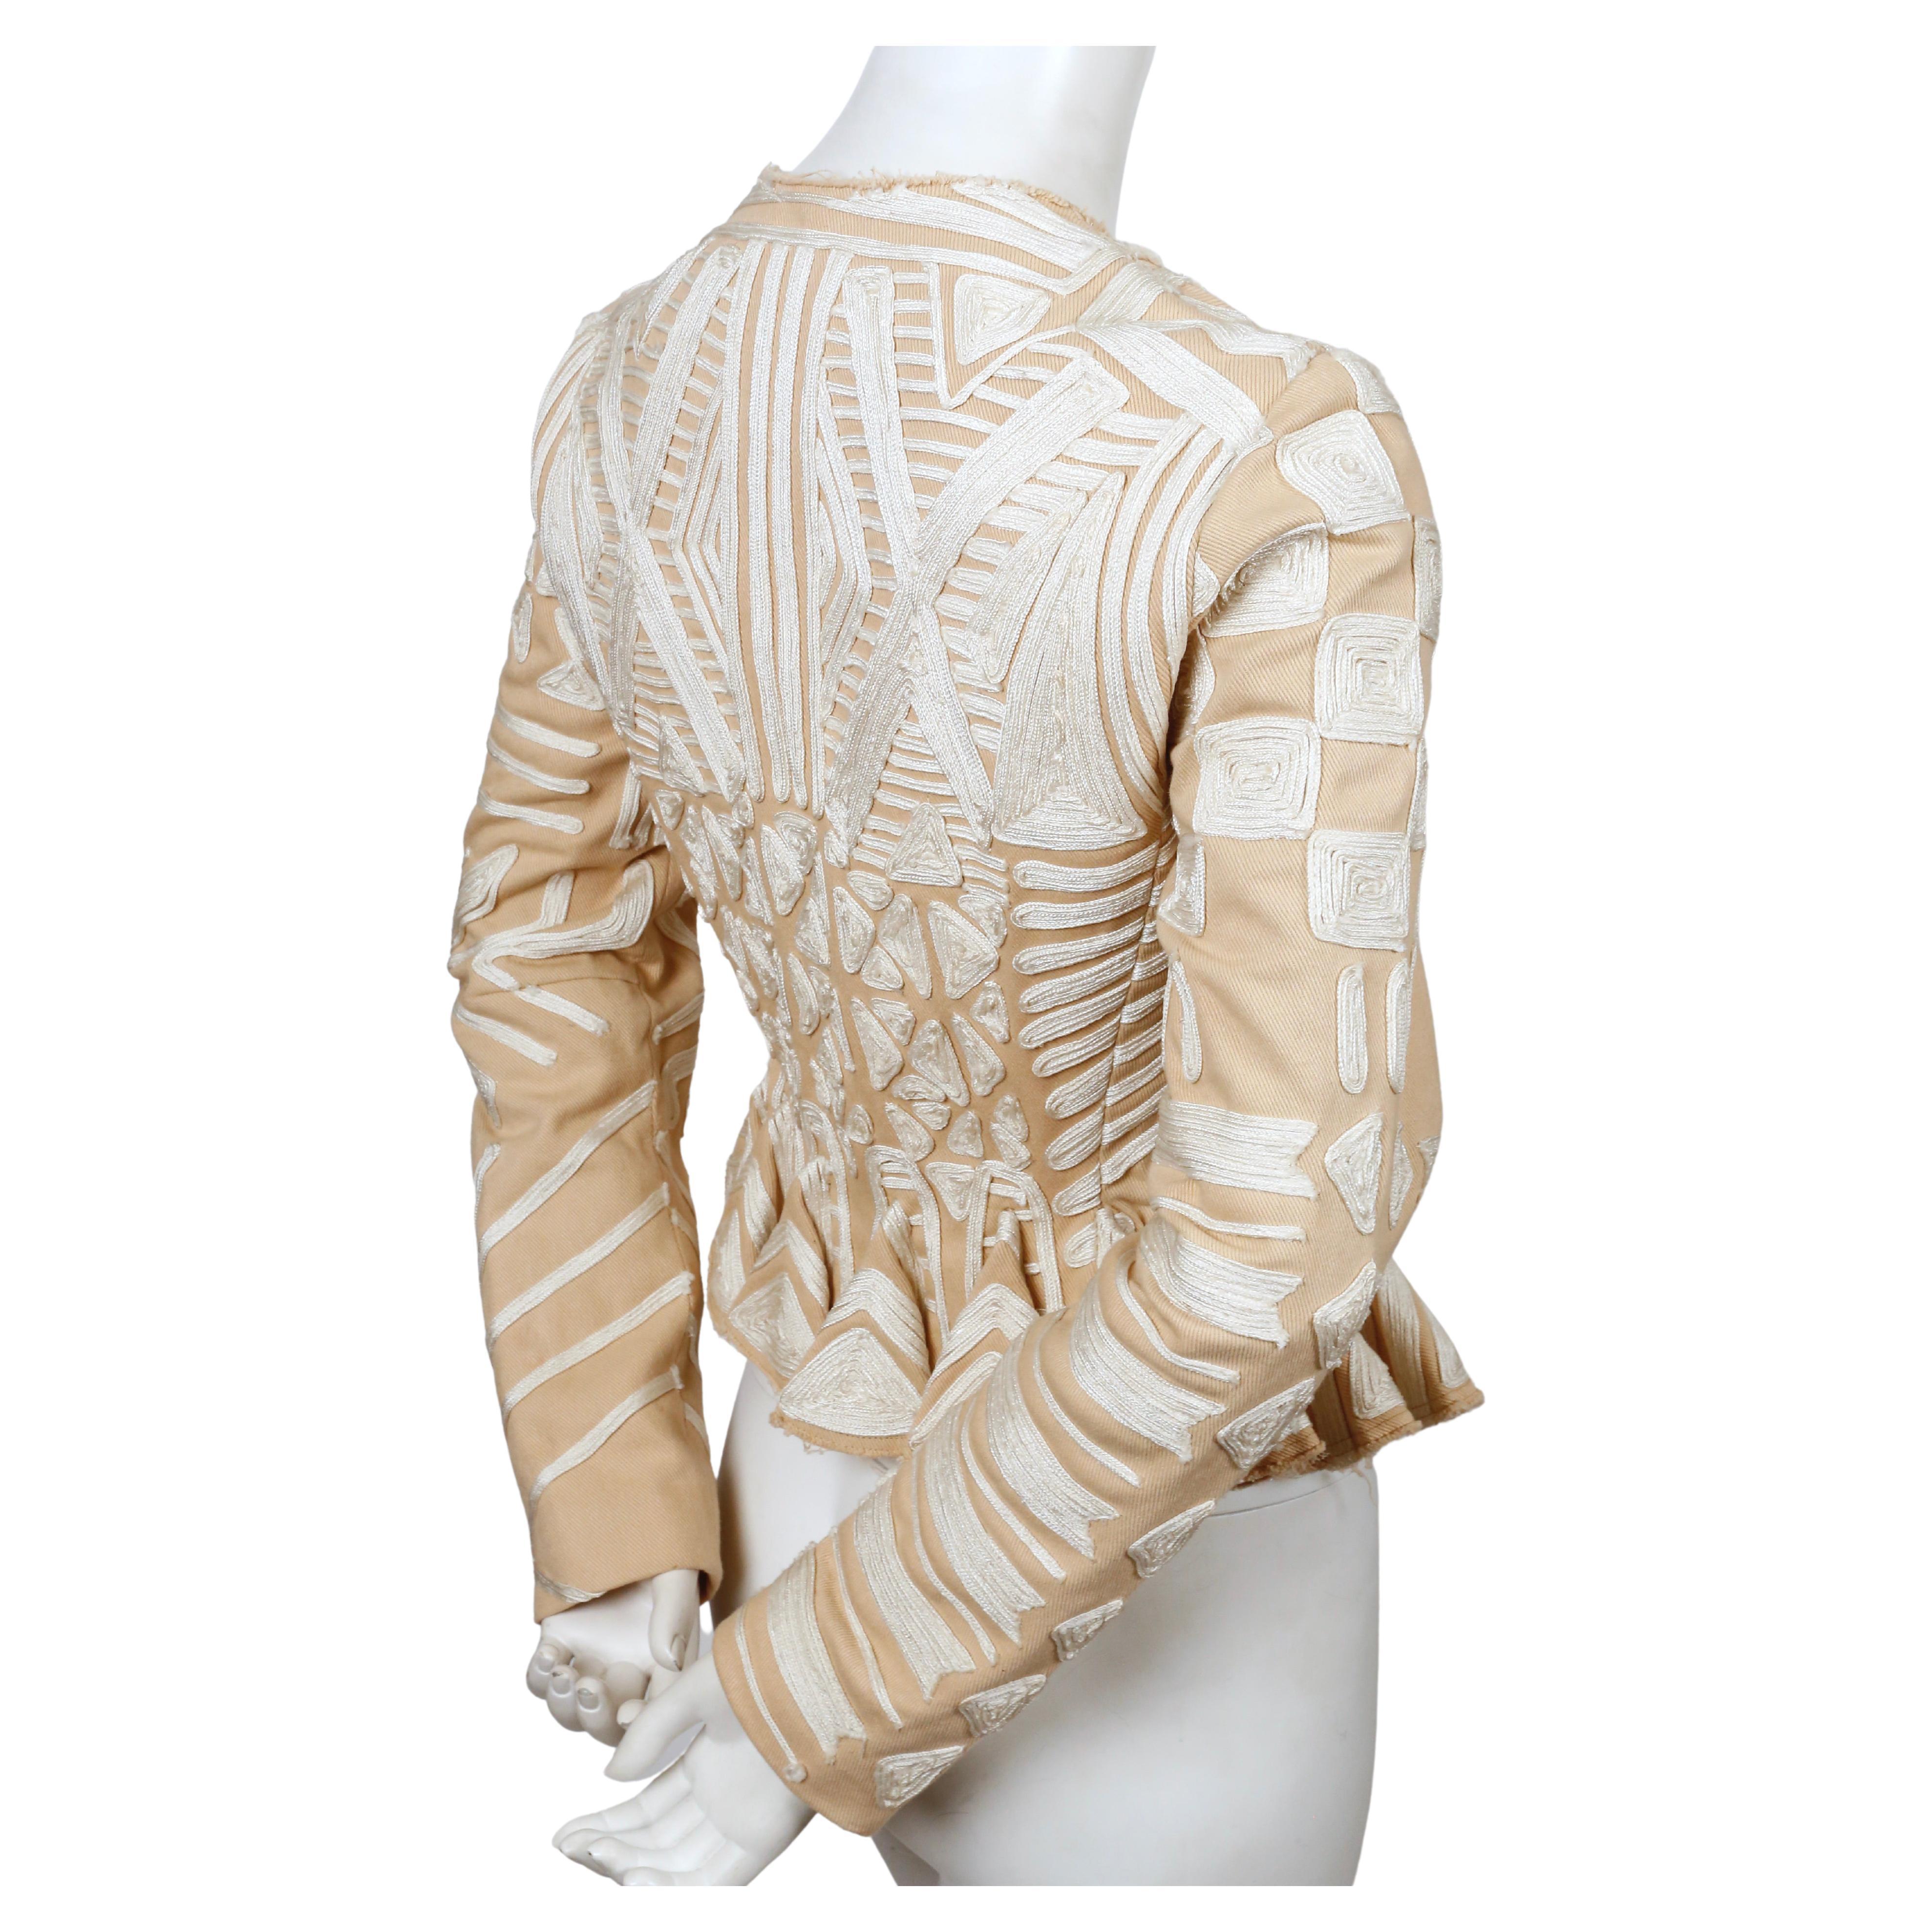 Very rare, tan canvas peplum jacket with embroidery designed by Tom Ford for Yves Saint Laurent exactly as seen on the runway for Spring 2002. Labeled a French size 38 although this also fits a French 36 or US 2-4.  Approximate measurements: 14.5